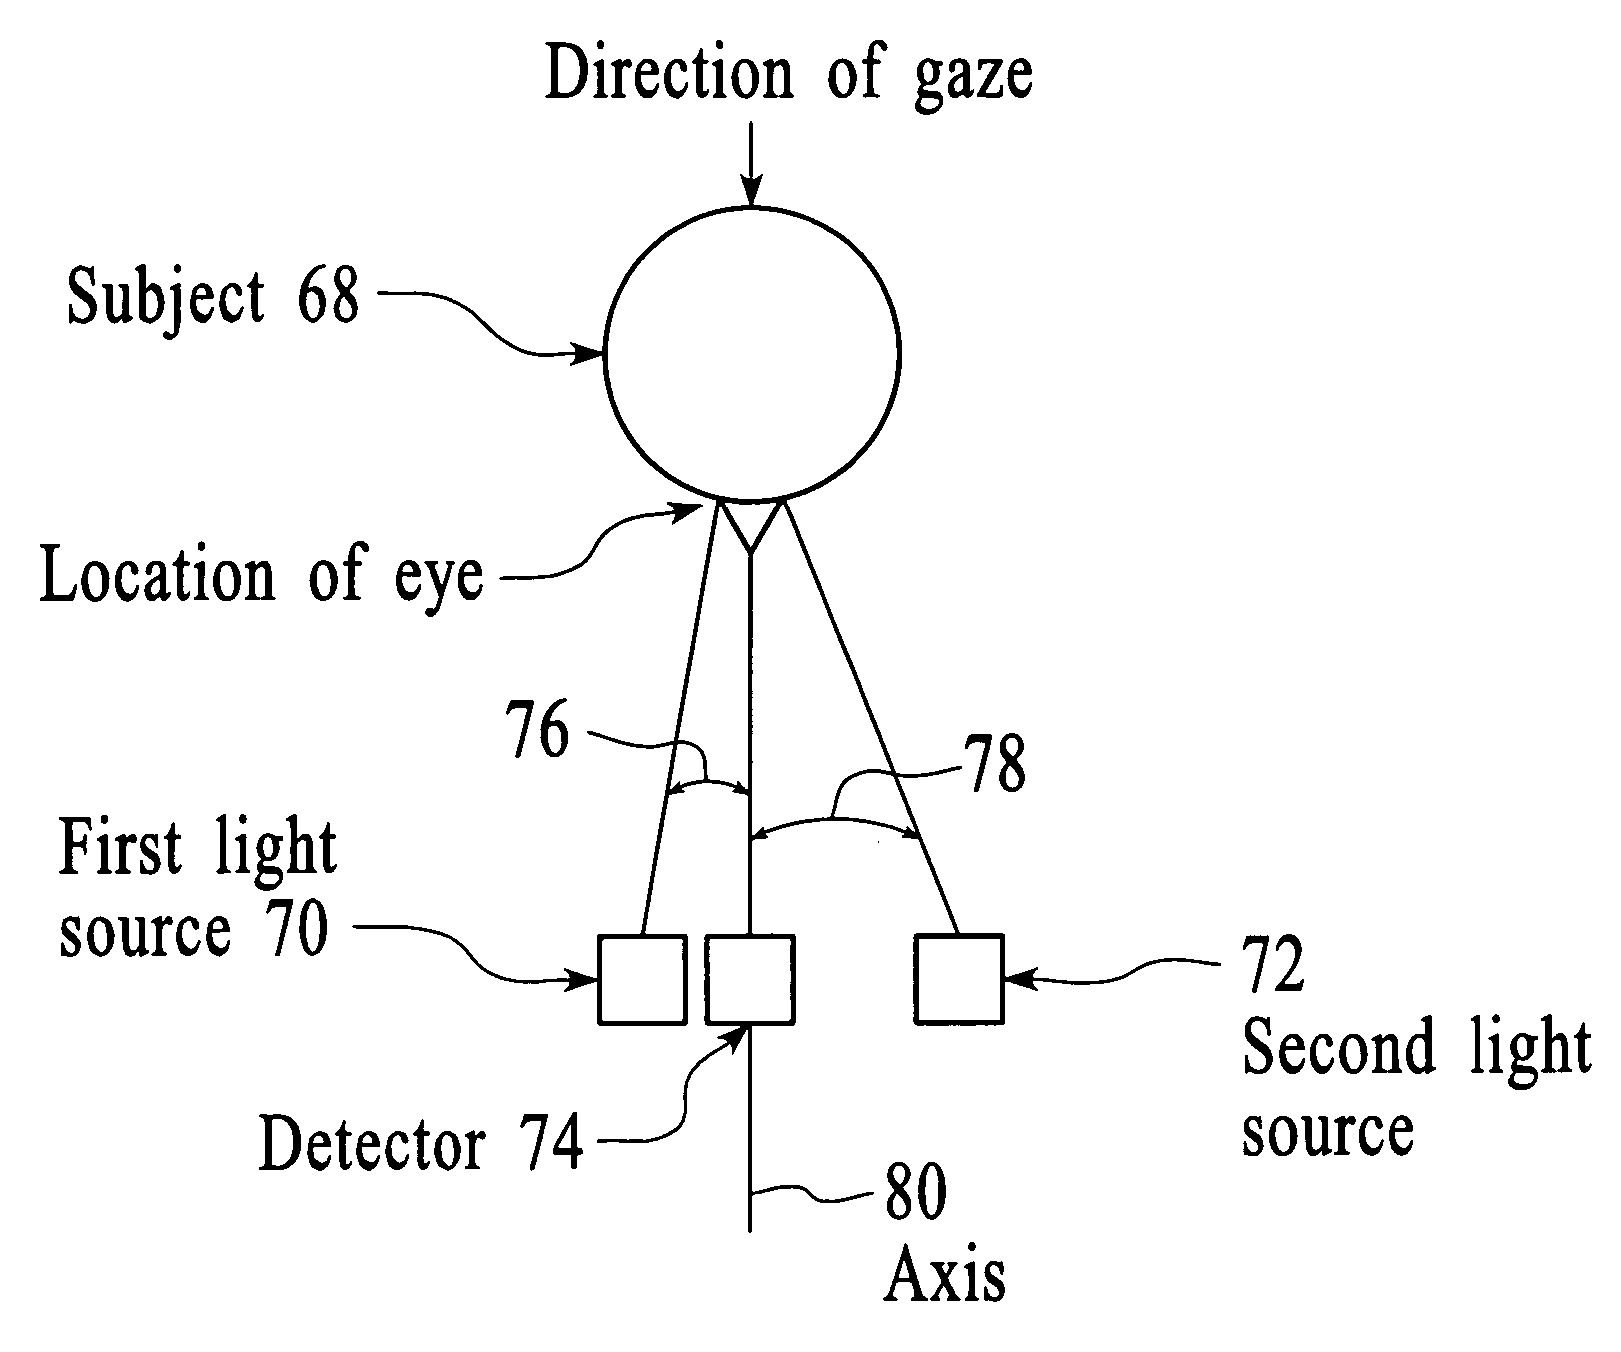 Wavelength selectivity enabling subject monitoring outside the subject's field of view